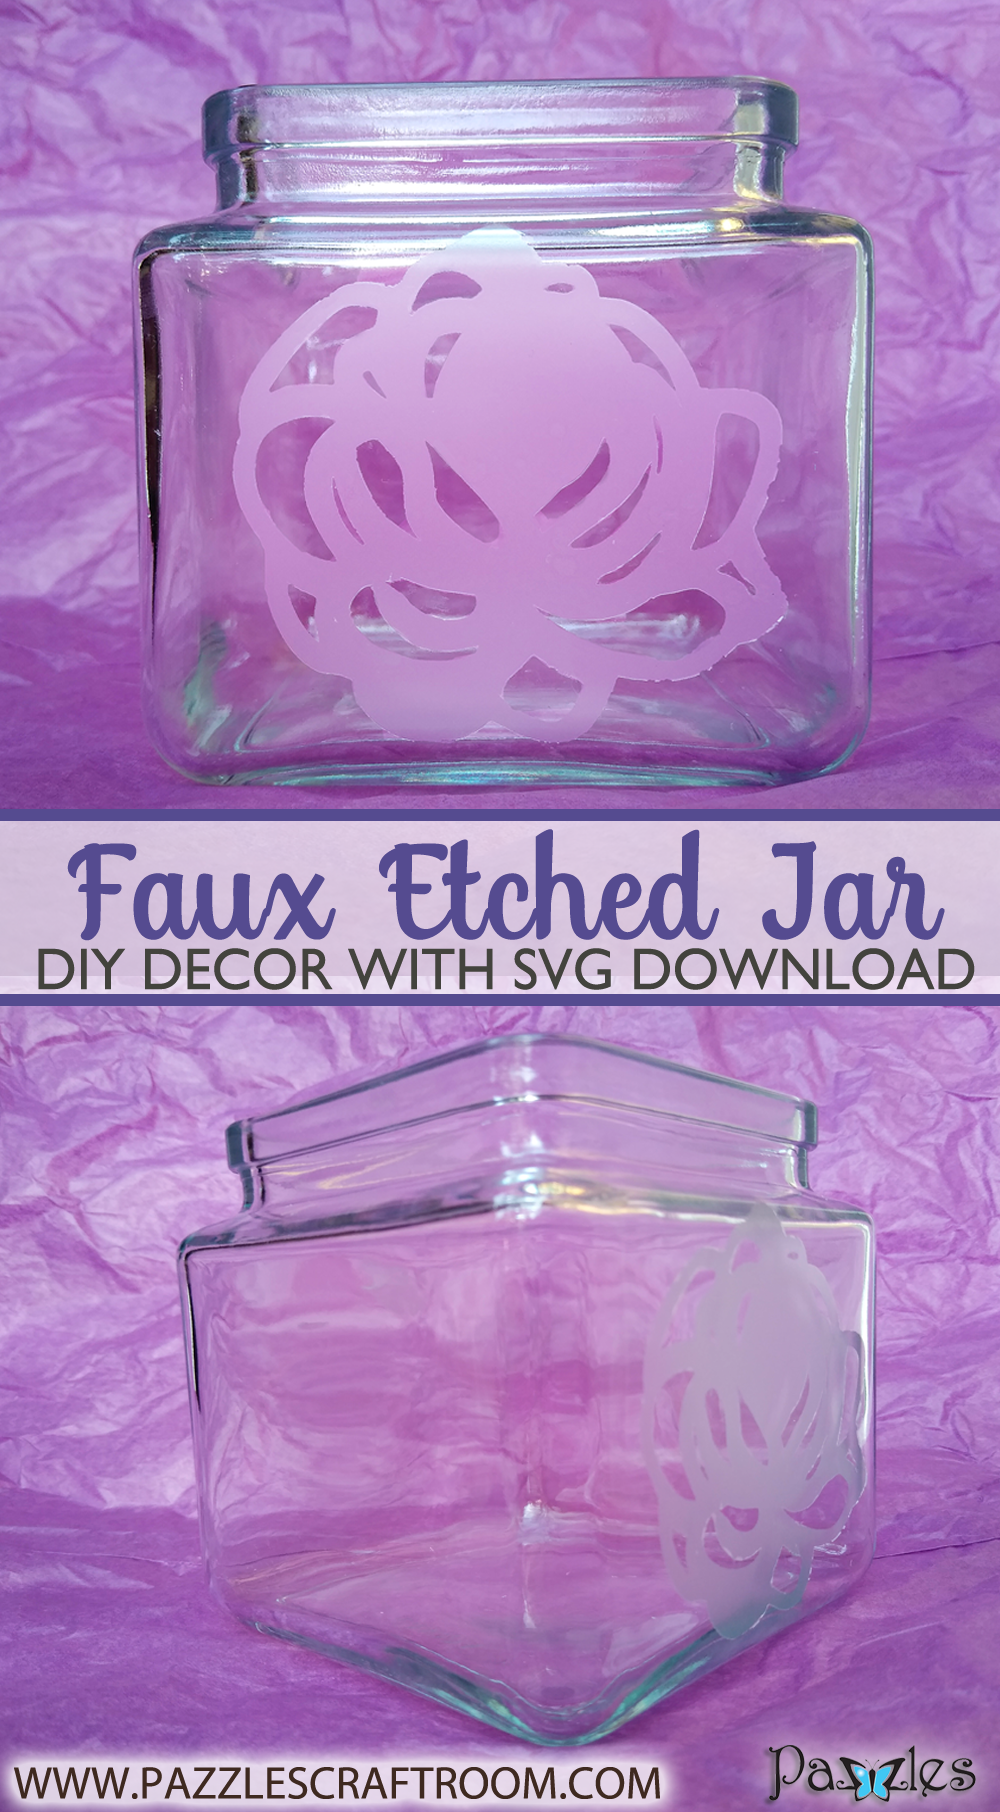 Pazzles DIY Faux Etched Glass with SVG download compatible with all major electronic cutters including Pazzles Inspiration, Cricut, and Silhouette Cameo by Renee Smart